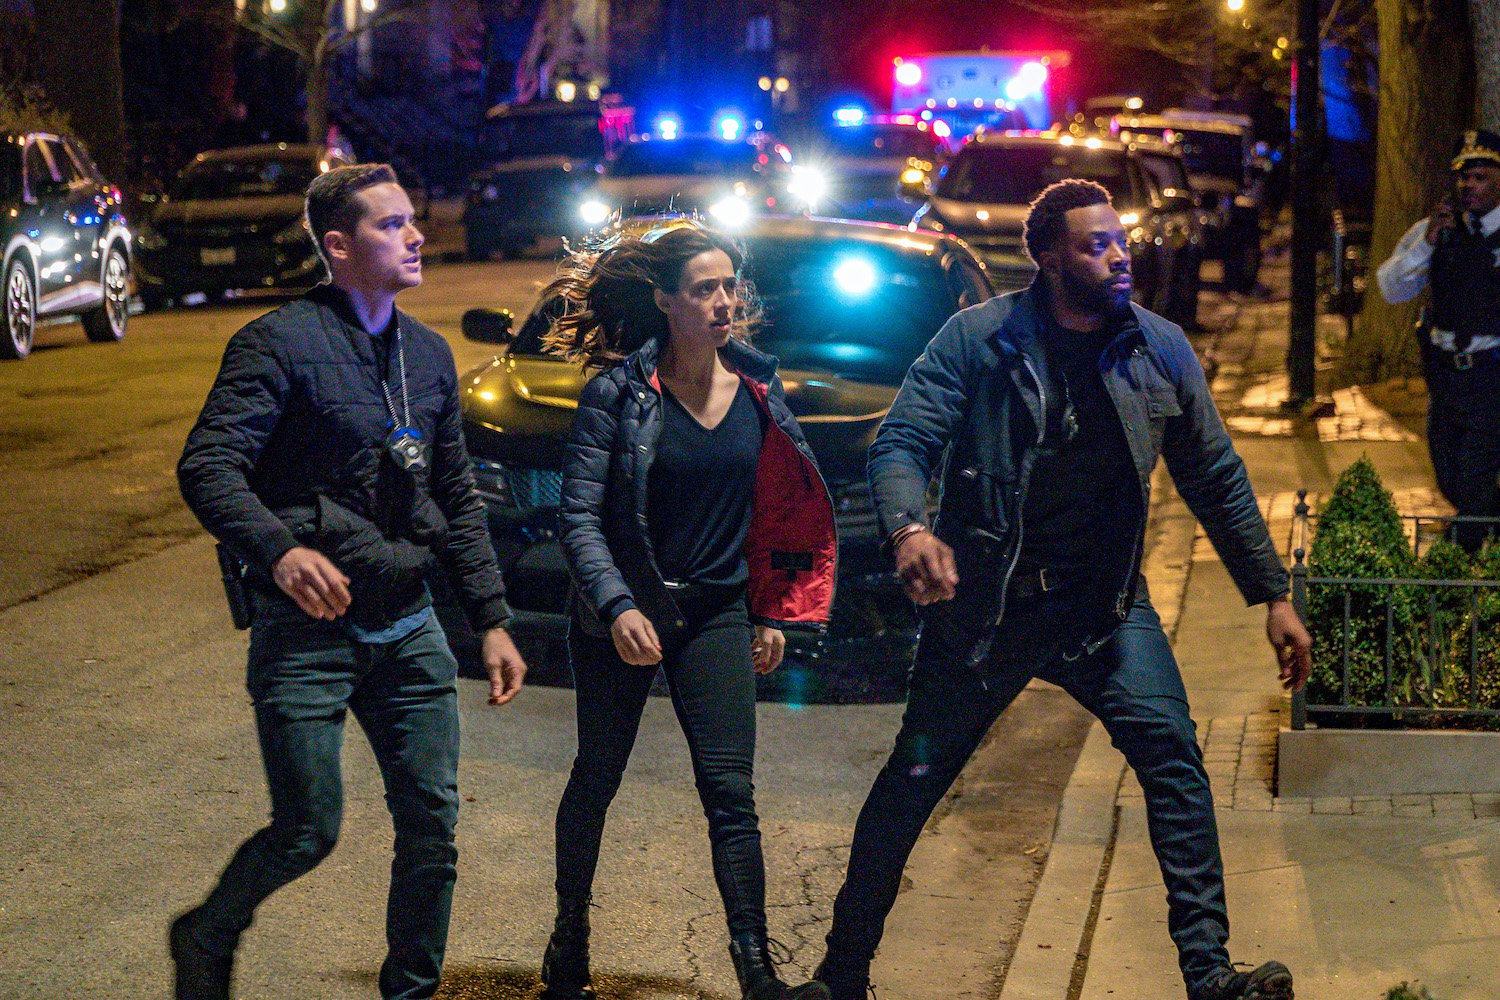 Jesse Lee Soffer as Det. Jay Halstead, Marina Squerciati as Officer Kim Burgess, LaRoyce Hawkins as Officer Kevin Atwater walking outside in front of several police cars with lights on